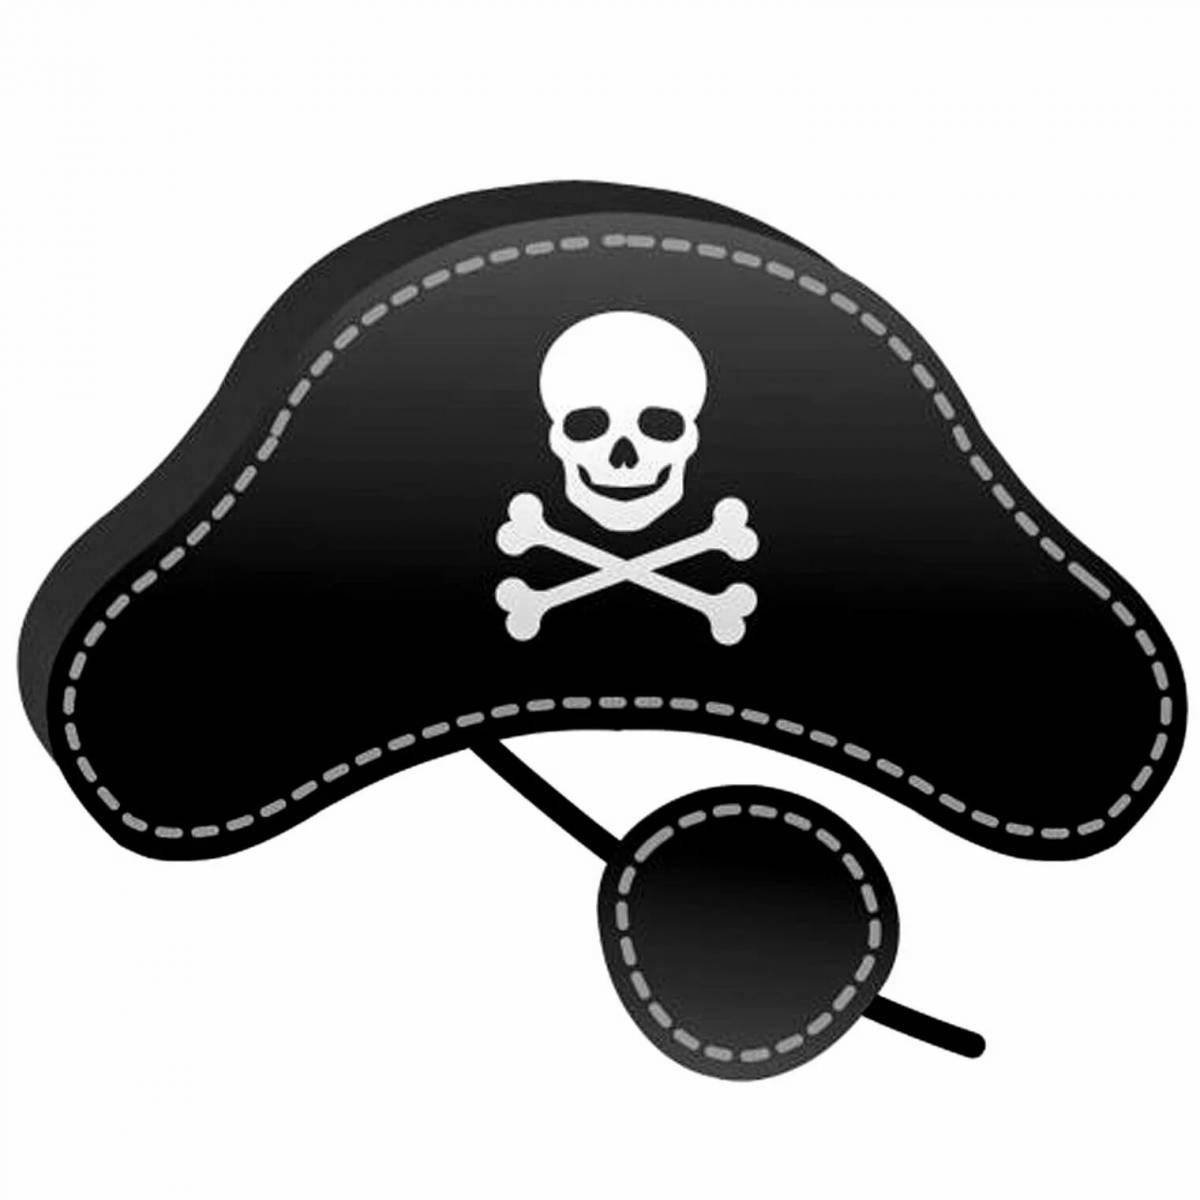 Coloring book shining pirate hat